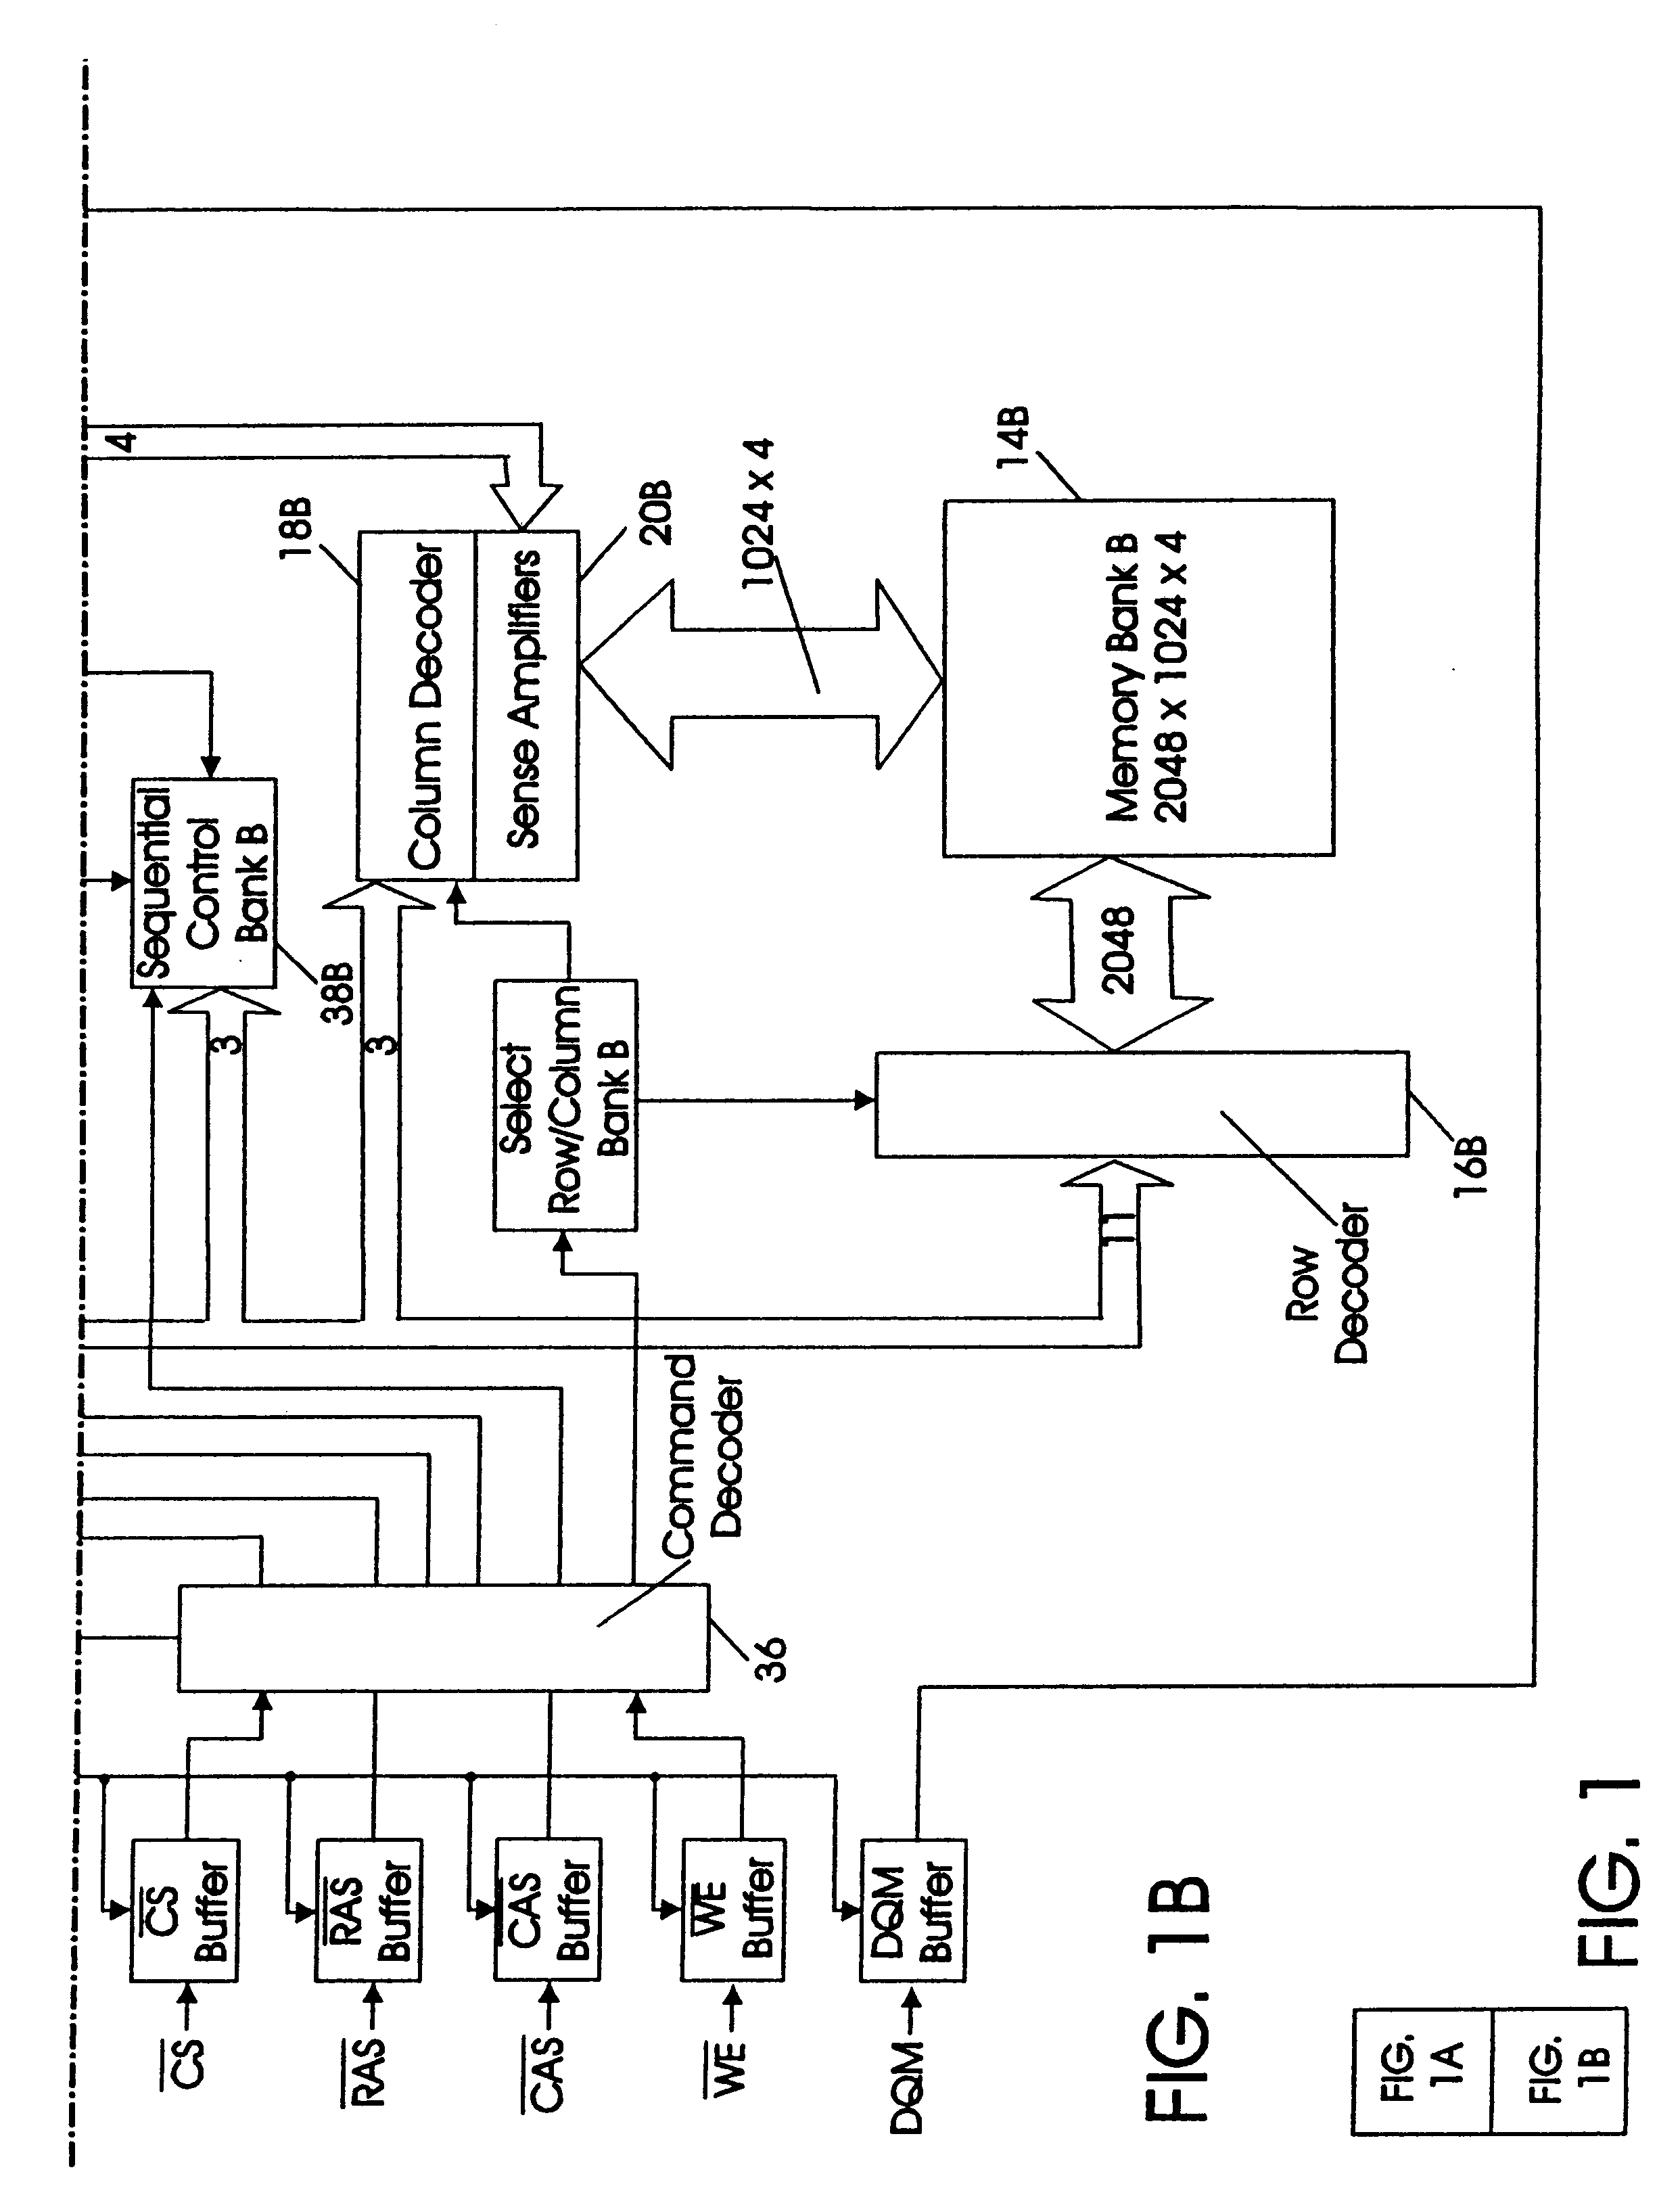 Cached synchronous DRAM architecture having a mode register programmable cache policy